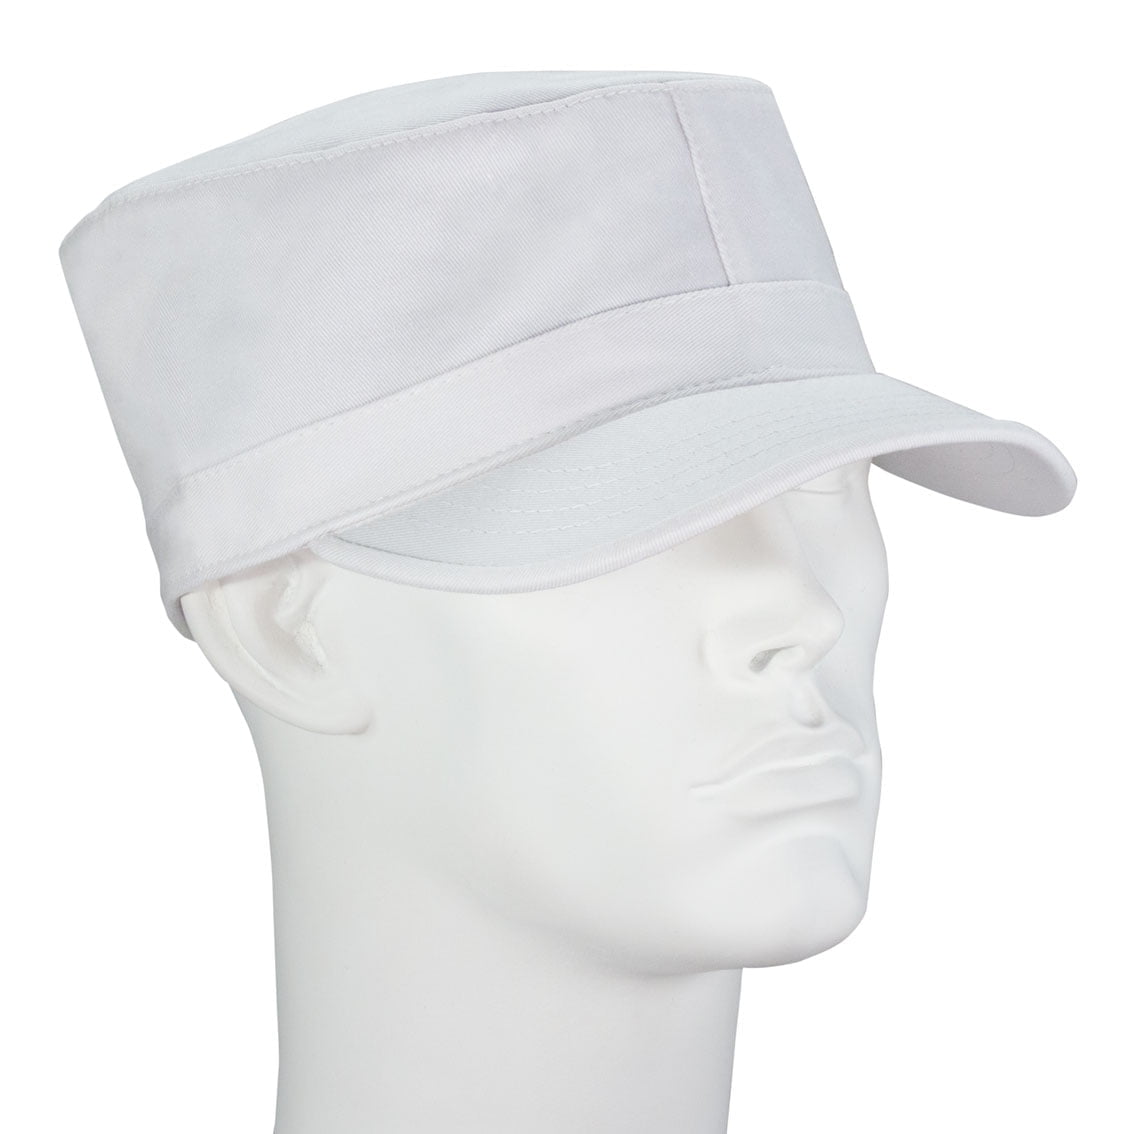 1pc White Solid Castro Military Fatigue Army Hat - Fitted - Unconstructed - 100% Cotton